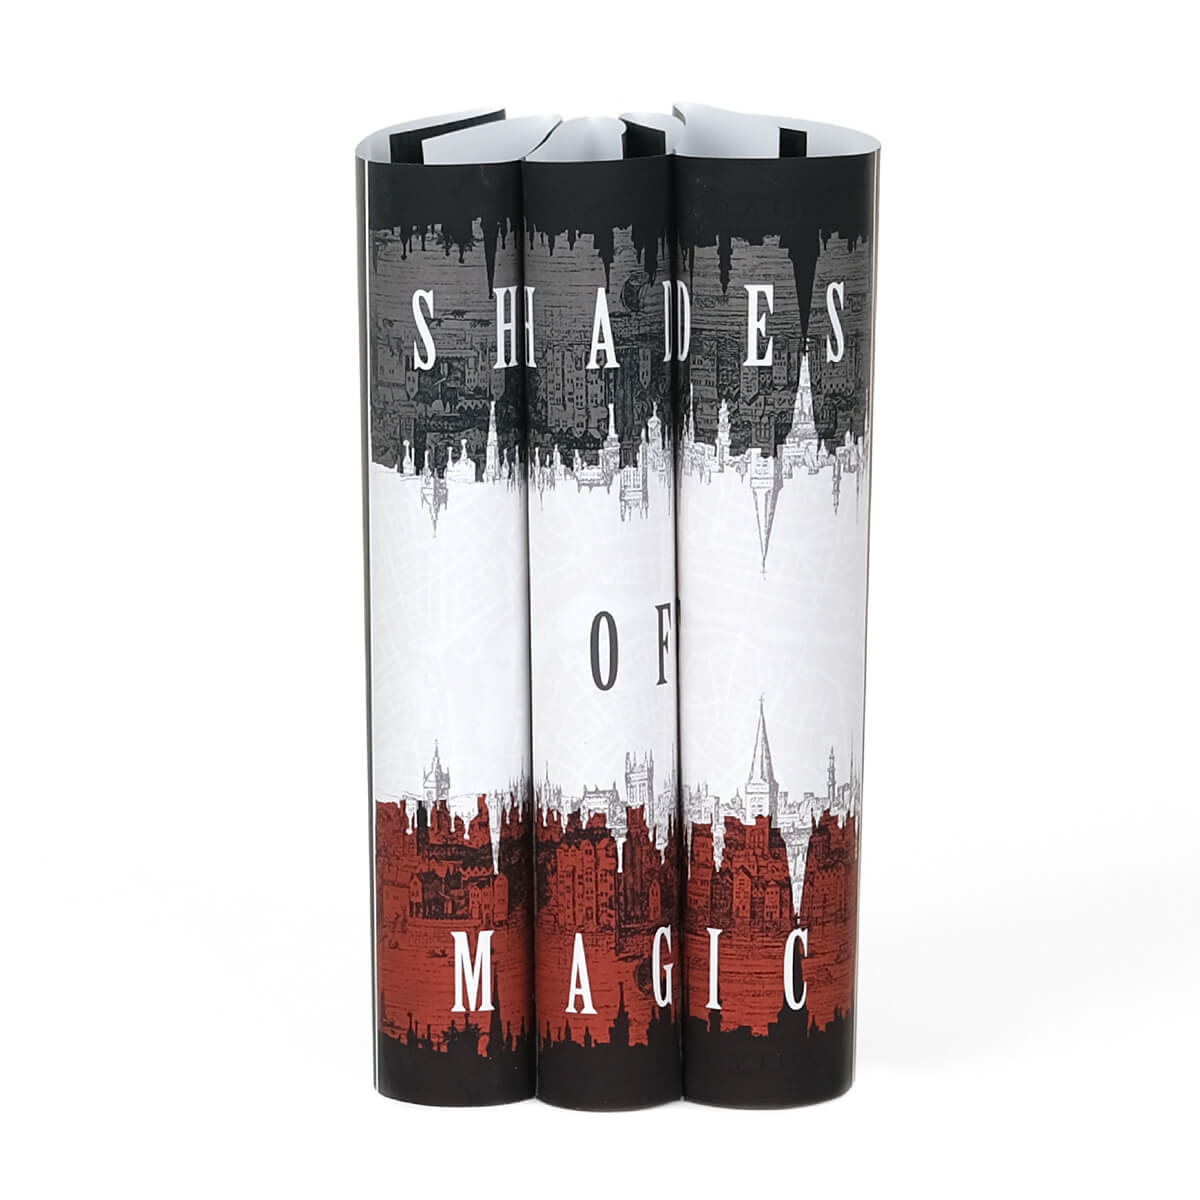 Dust Jackets Only feature a black, grey, white, and red city layered against a white map background. Shades of Magic typed across spines in white serif font.